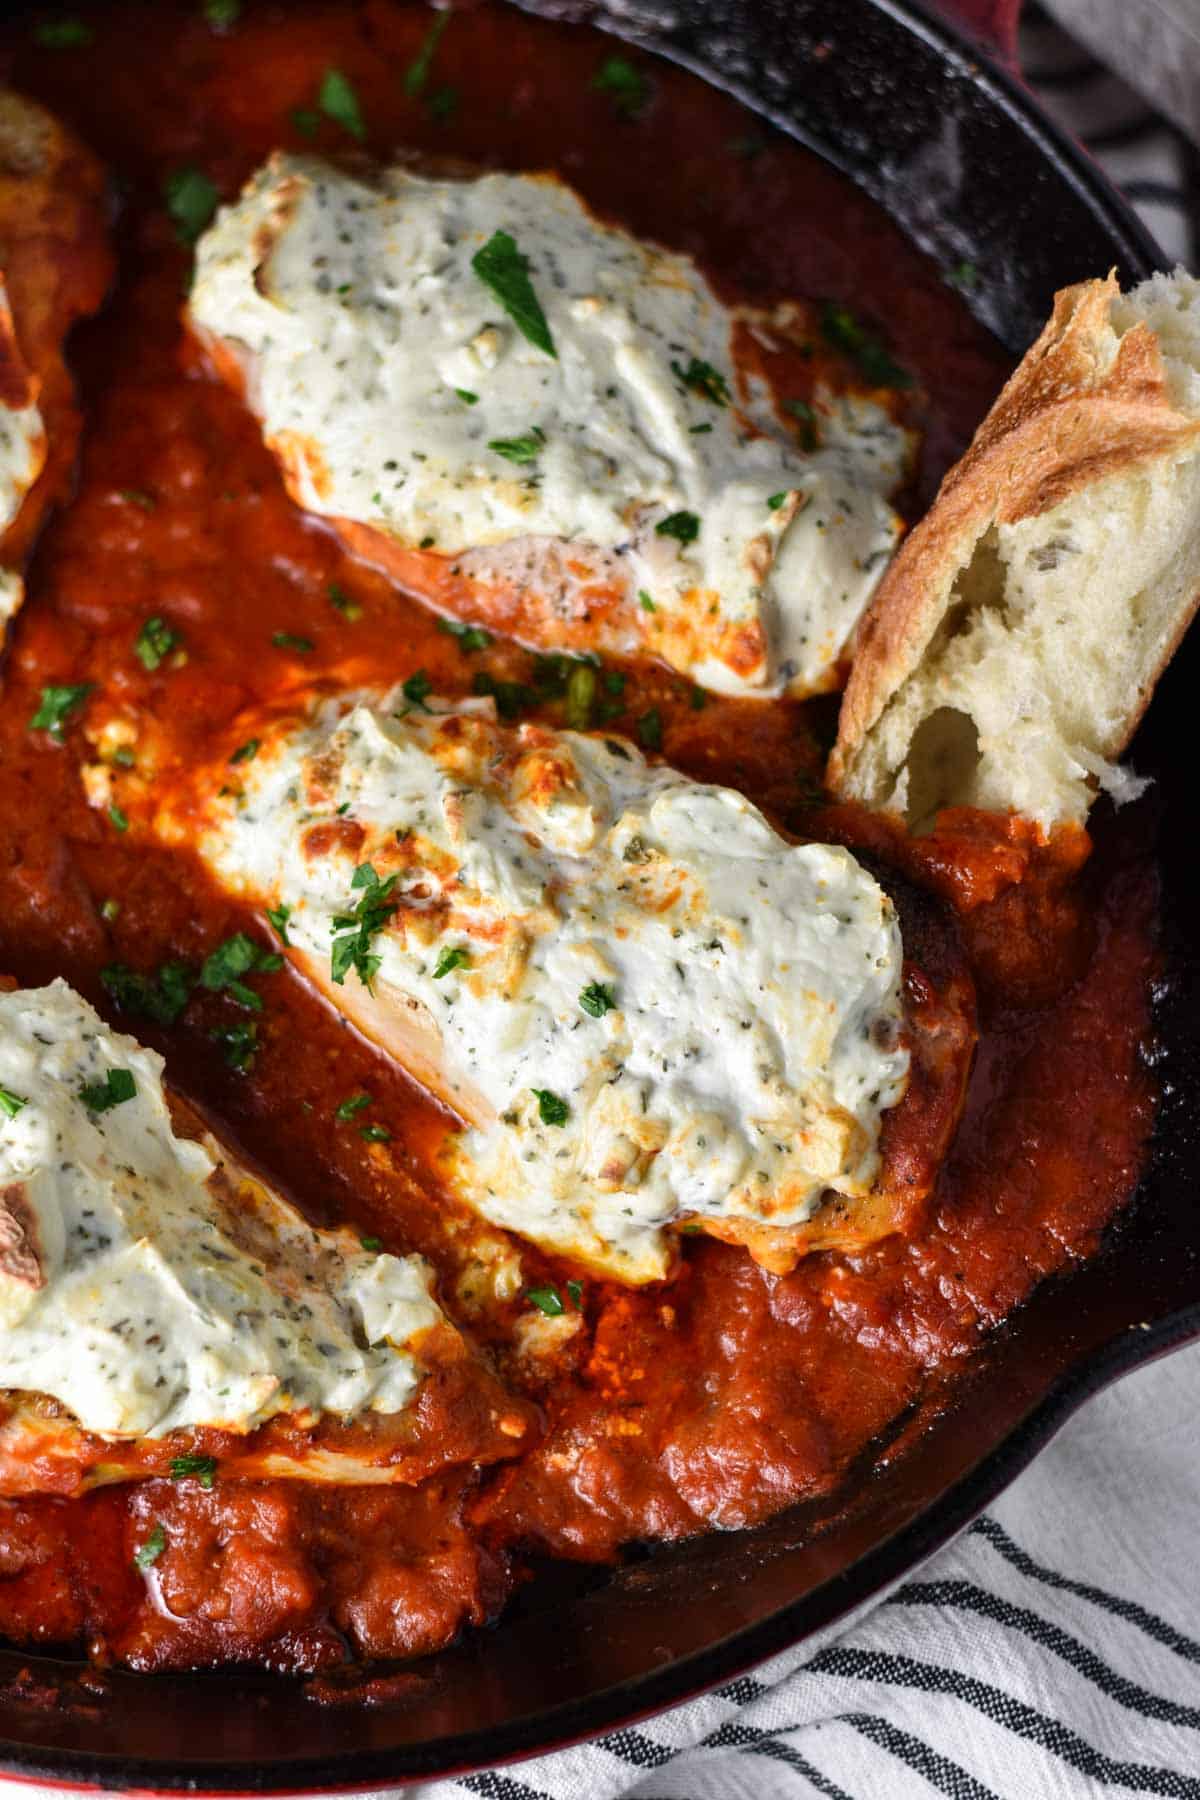 Bread dipping into a chicken with marinara sauce and ricotta cheese.